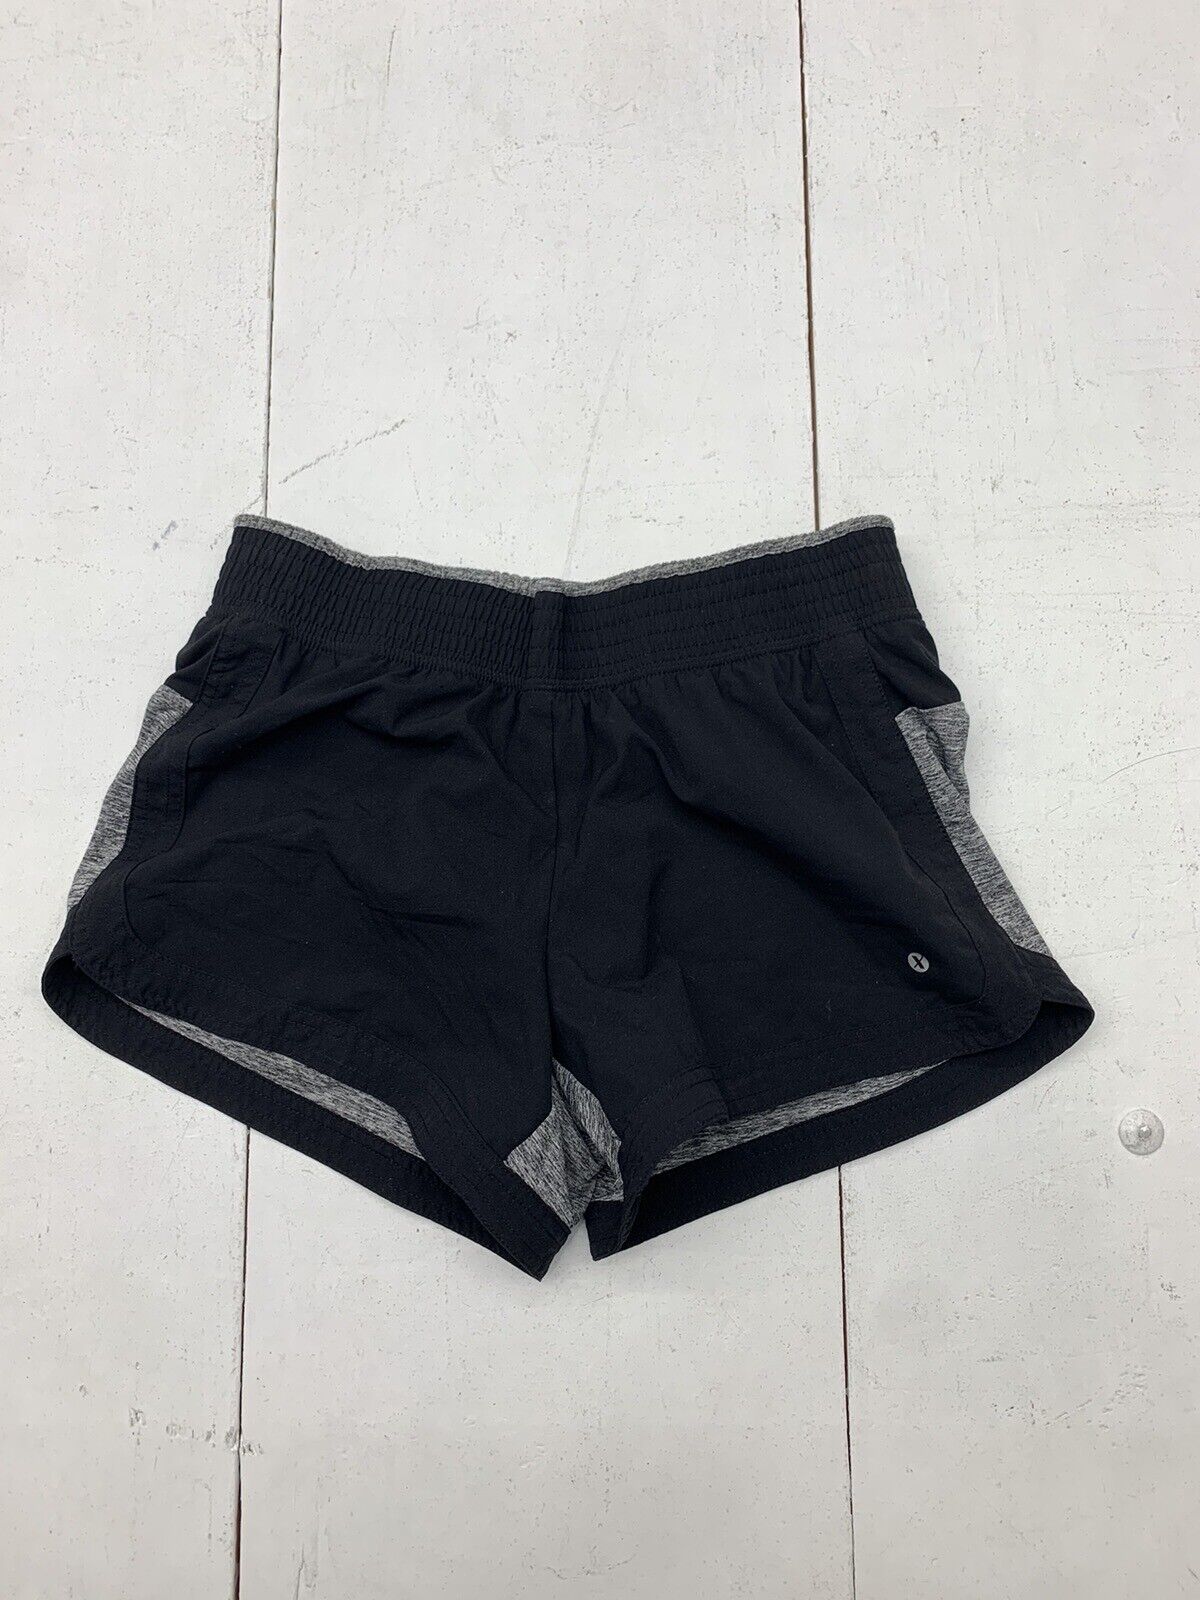 Xersion Womens Black Grey Athletic Shorts Size Small